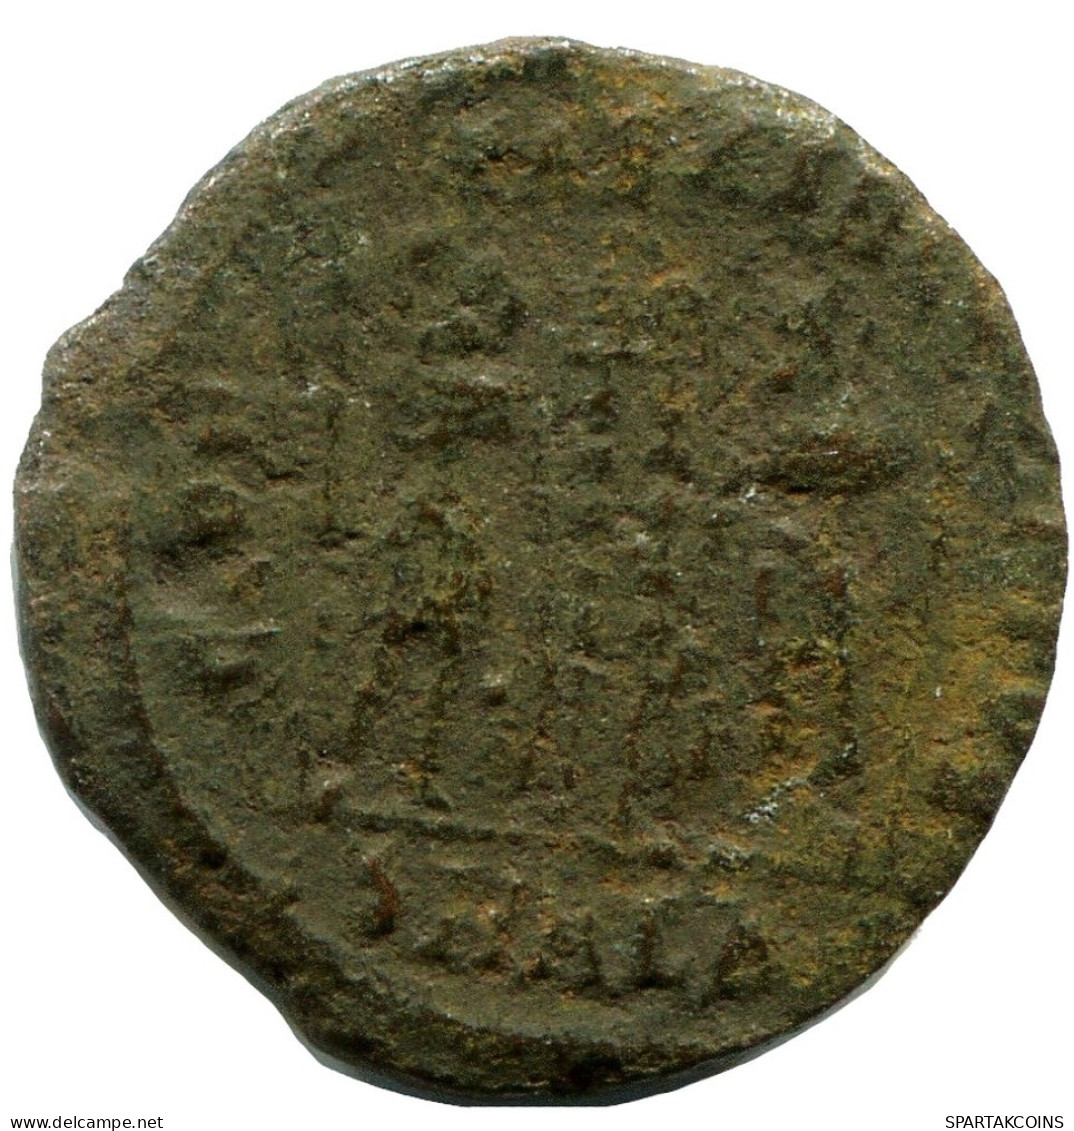 CONSTANS MINTED IN ALEKSANDRIA FOUND IN IHNASYAH HOARD EGYPT #ANC11458.14.F.A - The Christian Empire (307 AD To 363 AD)